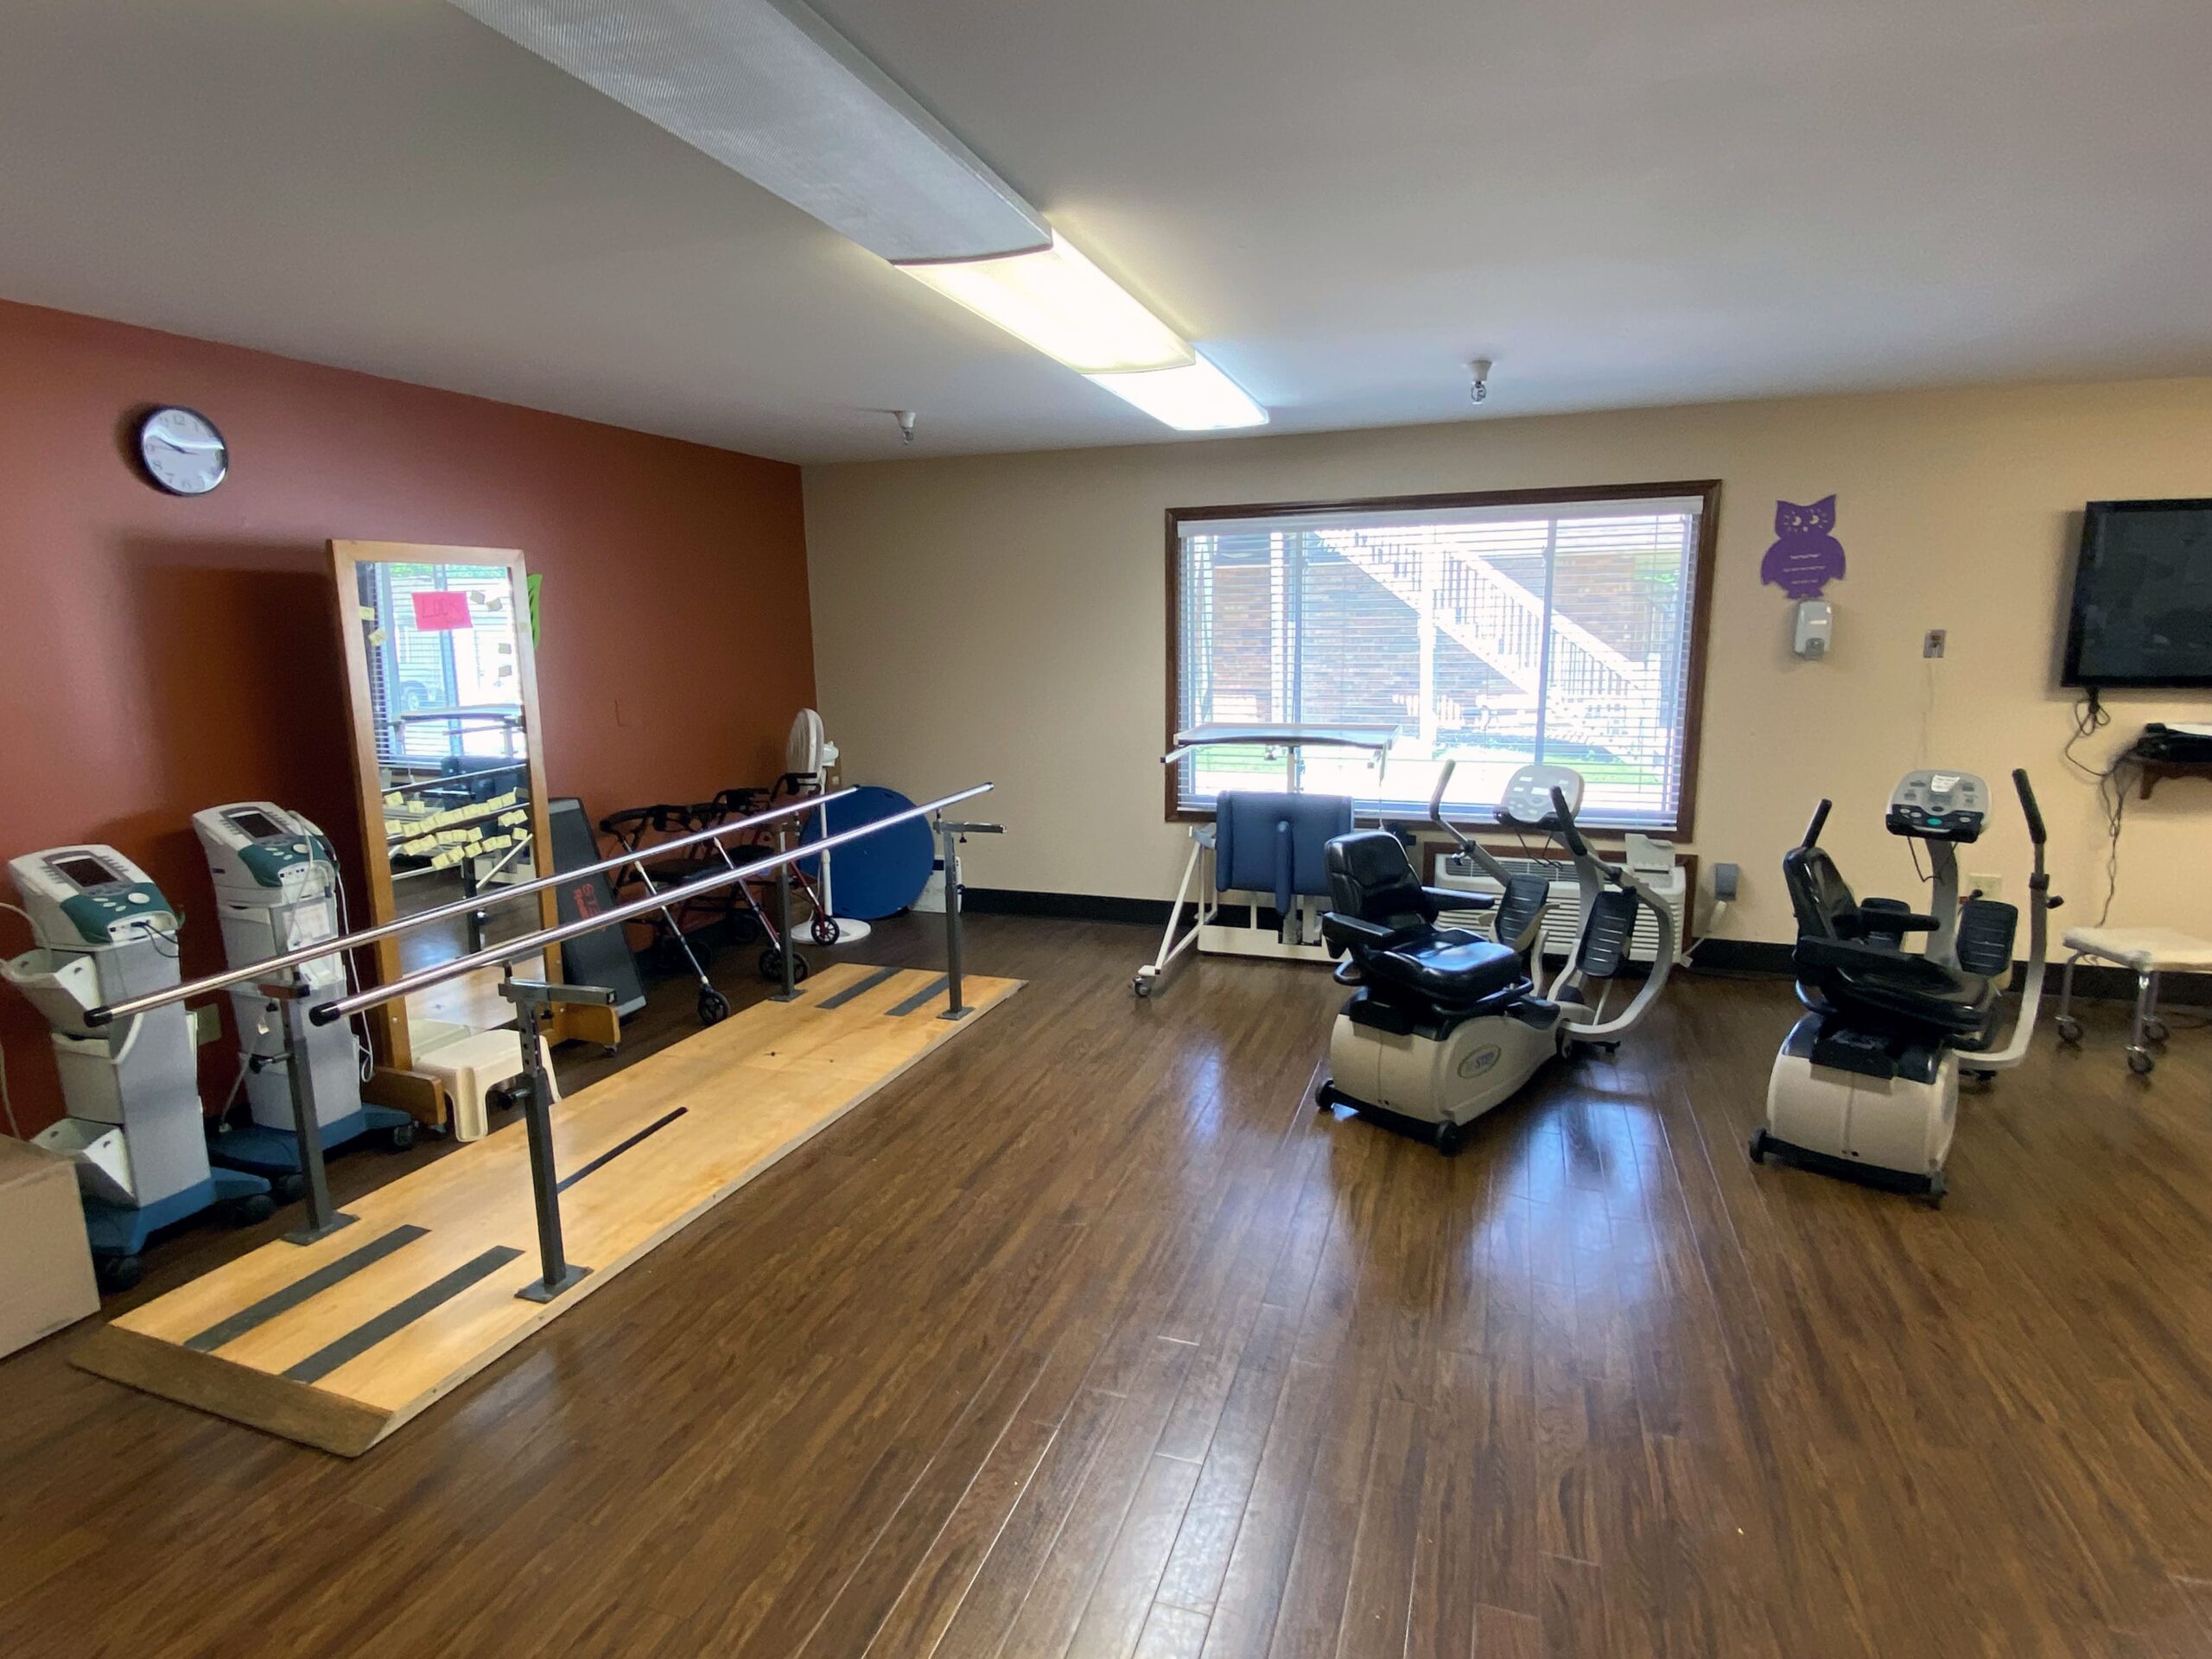 Brickyard Healthcare Terrace Care Center physical therapy equipment